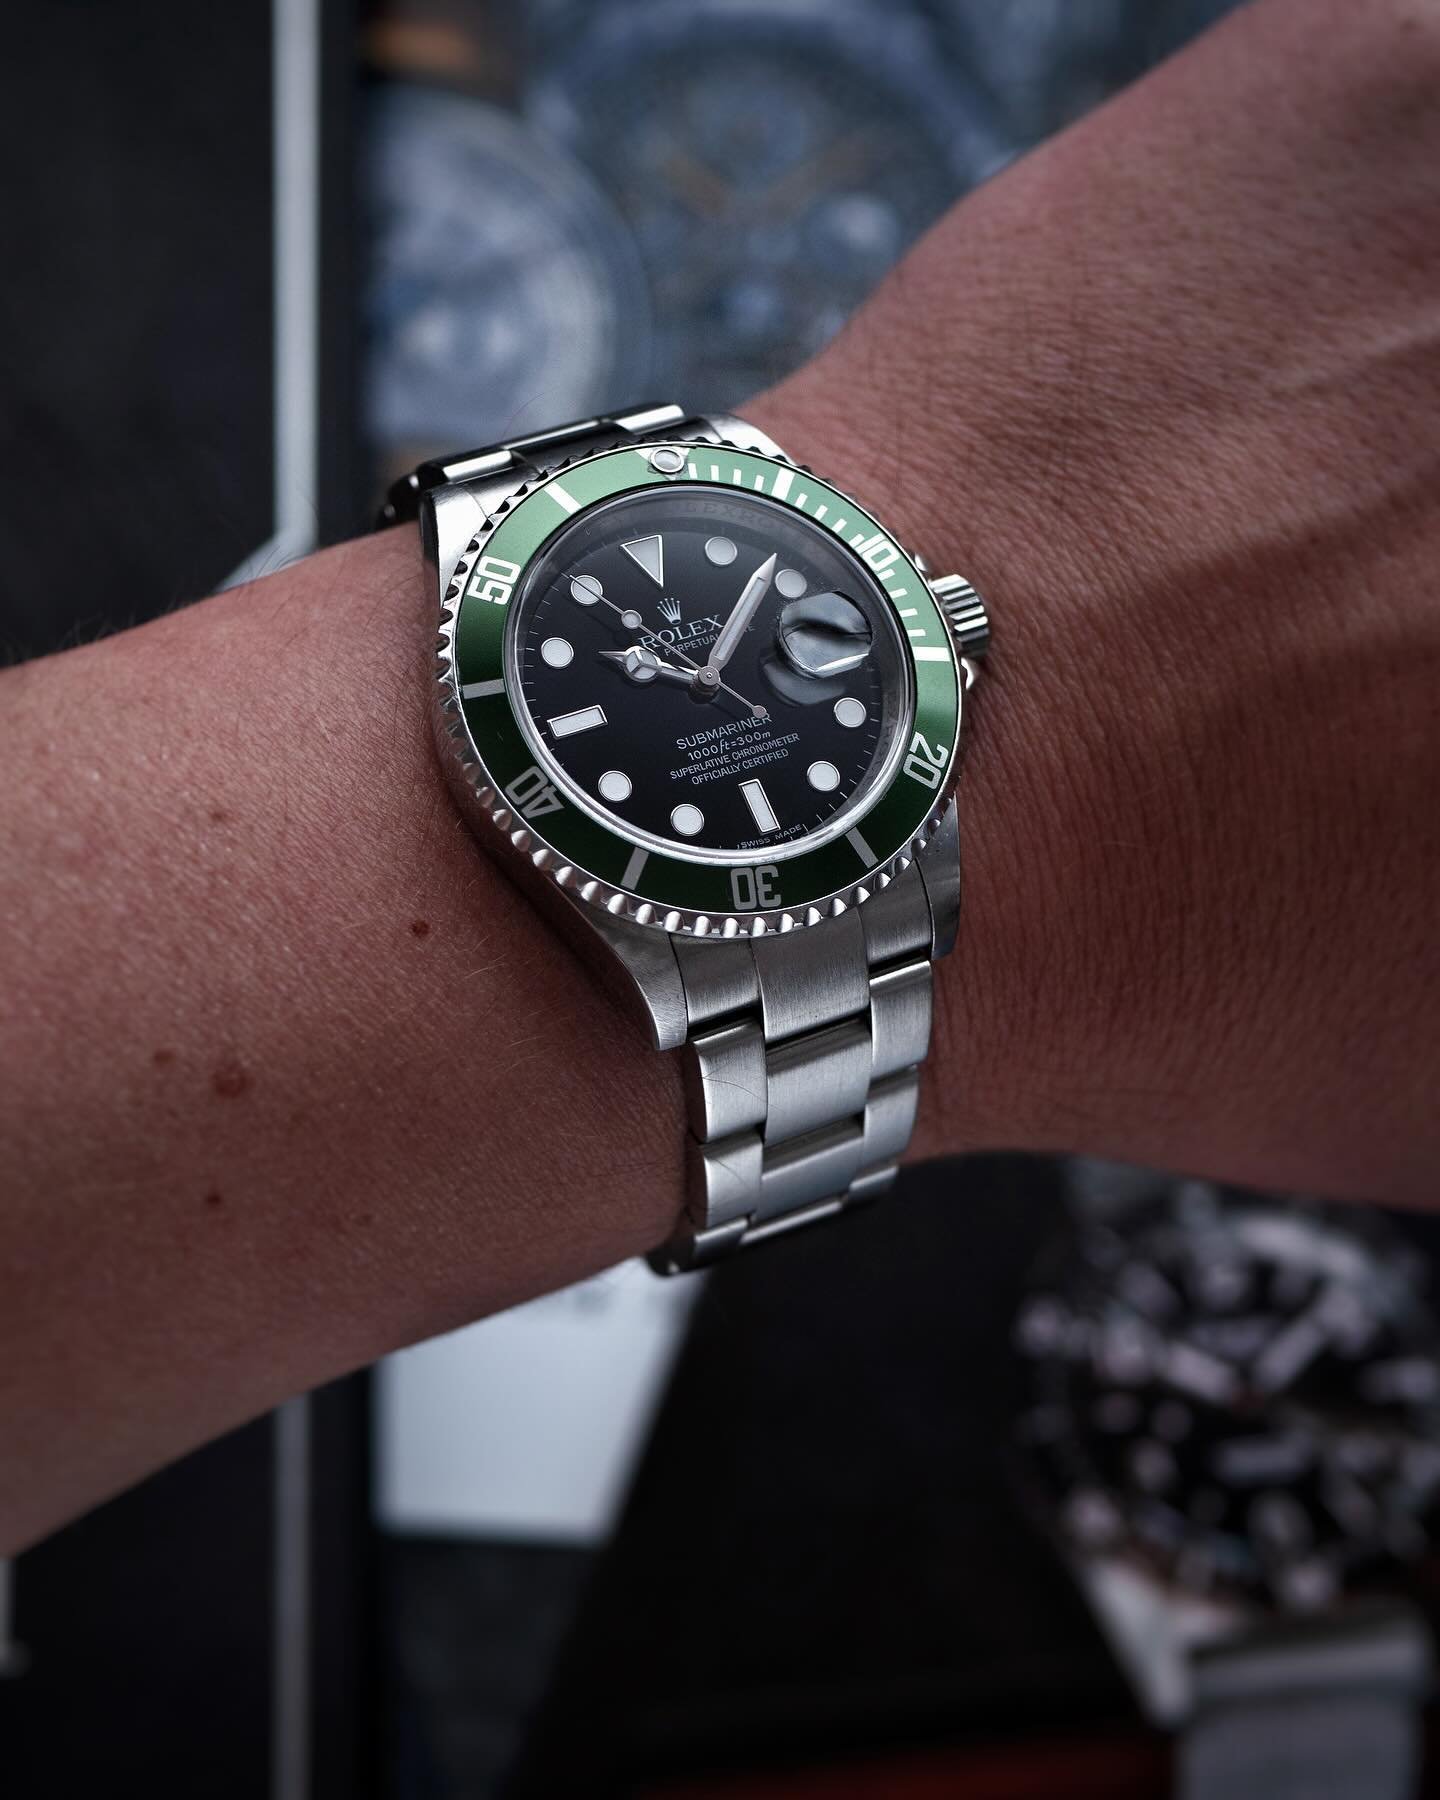 Some late Sunday Submariner shots with the #rolex Kermit 🐸

Having worn the Pelagos a lot recently this feels very different on wrist! But in a good way 👌🏻

Two very different dive watches but I&rsquo;m glad to have both 😊

If you could only have